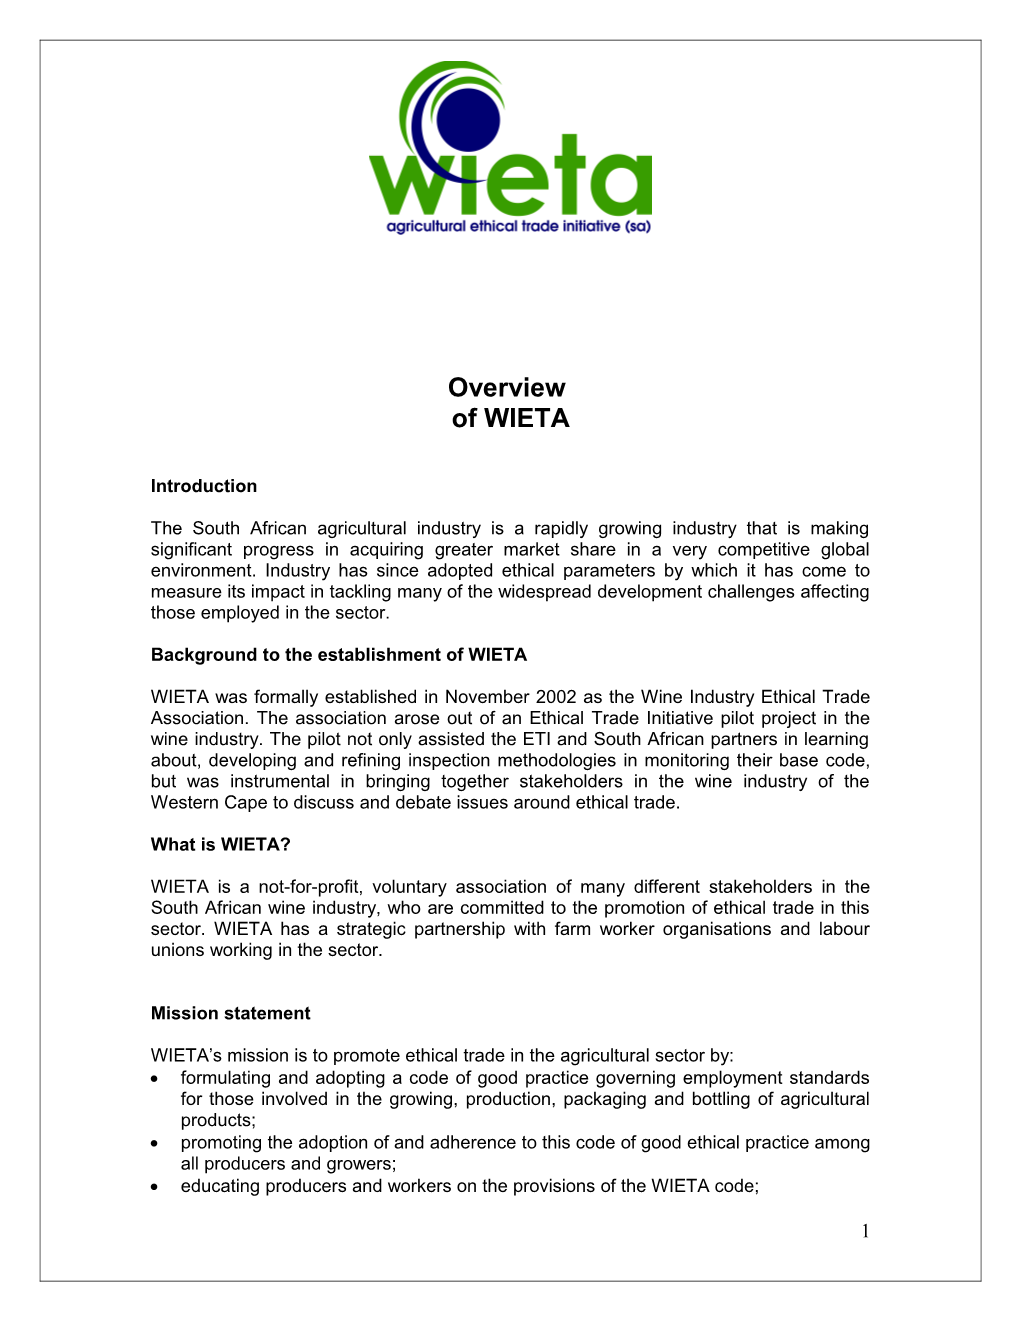 The Wine Industry Ethical Trade Association ( WIETA )